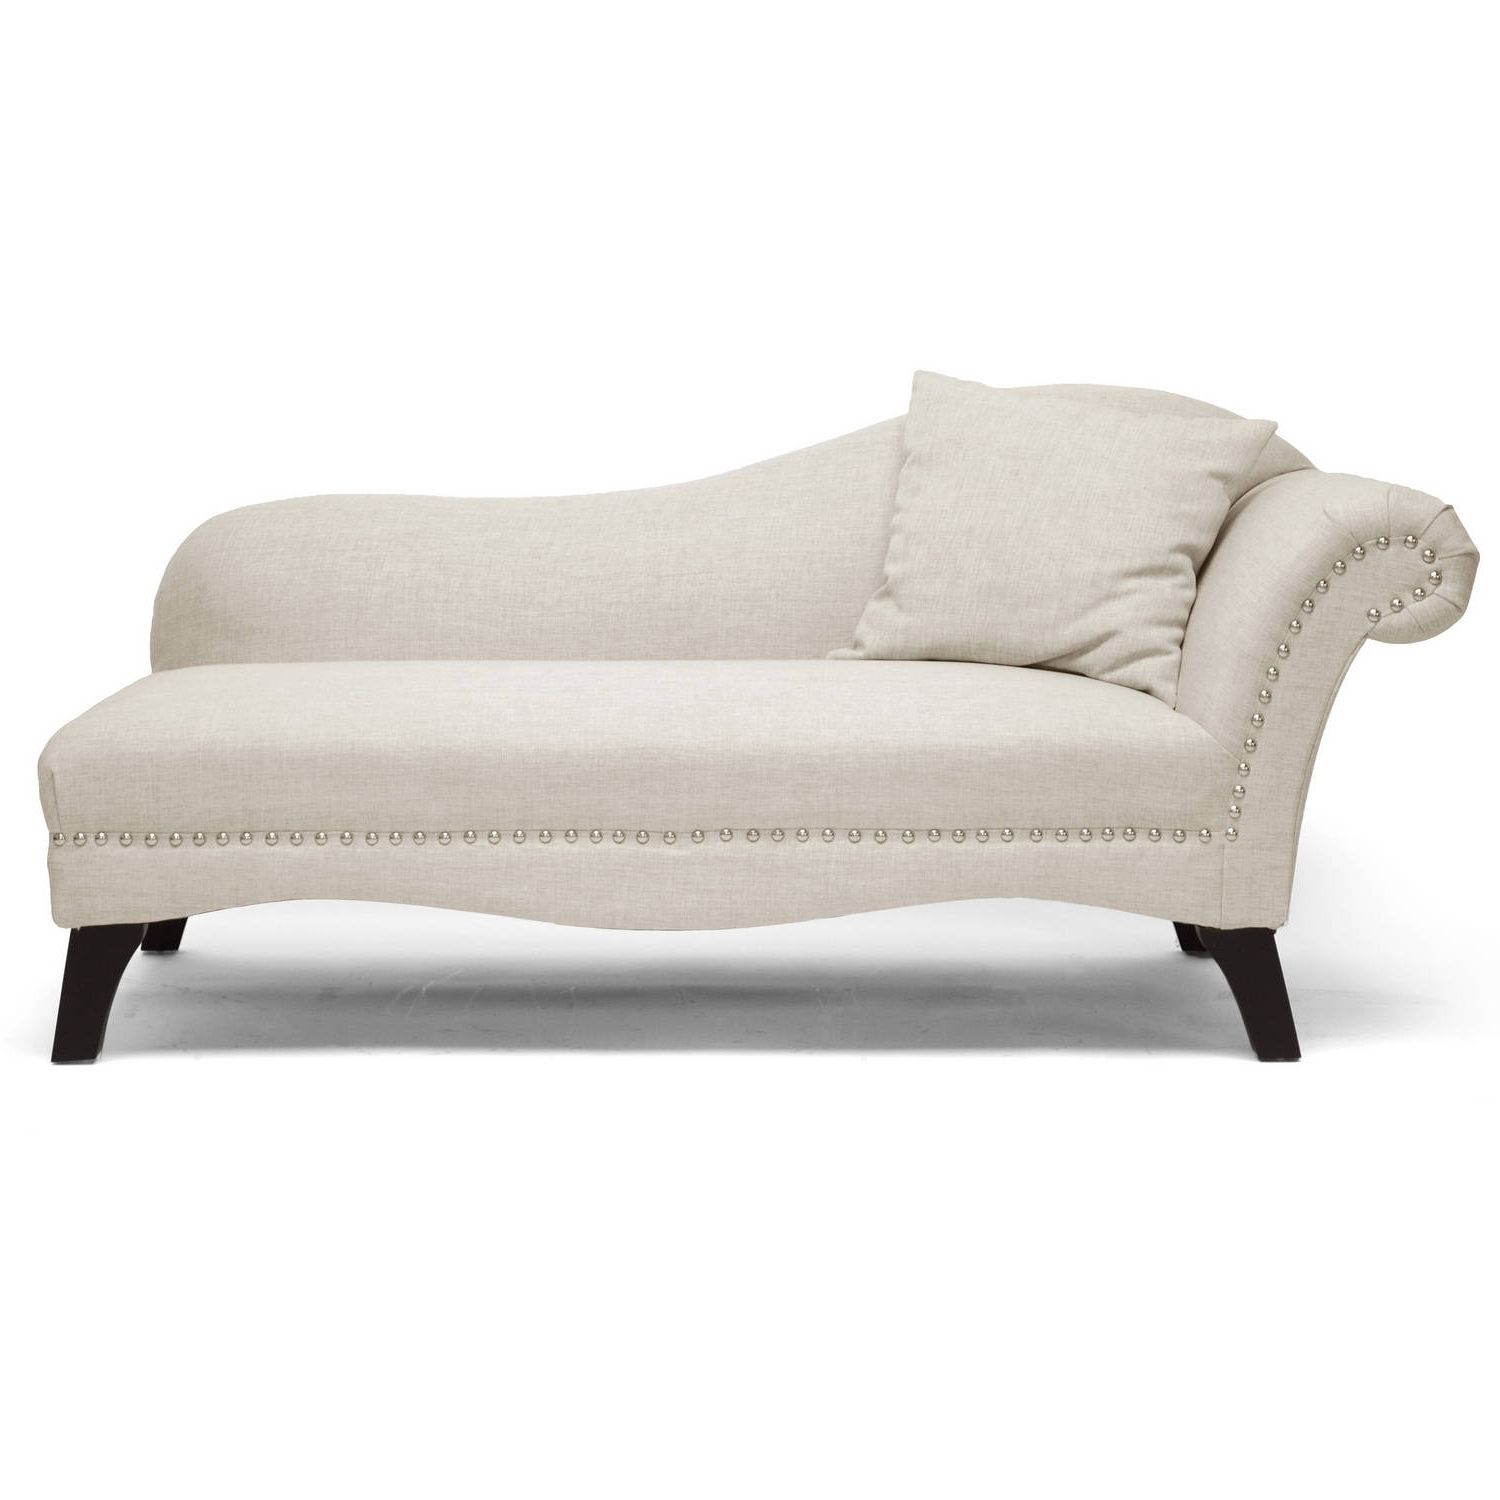 Favorite Chaise Lounges – Walmart In Bedroom Chaise Lounge Chairs (View 15 of 15)